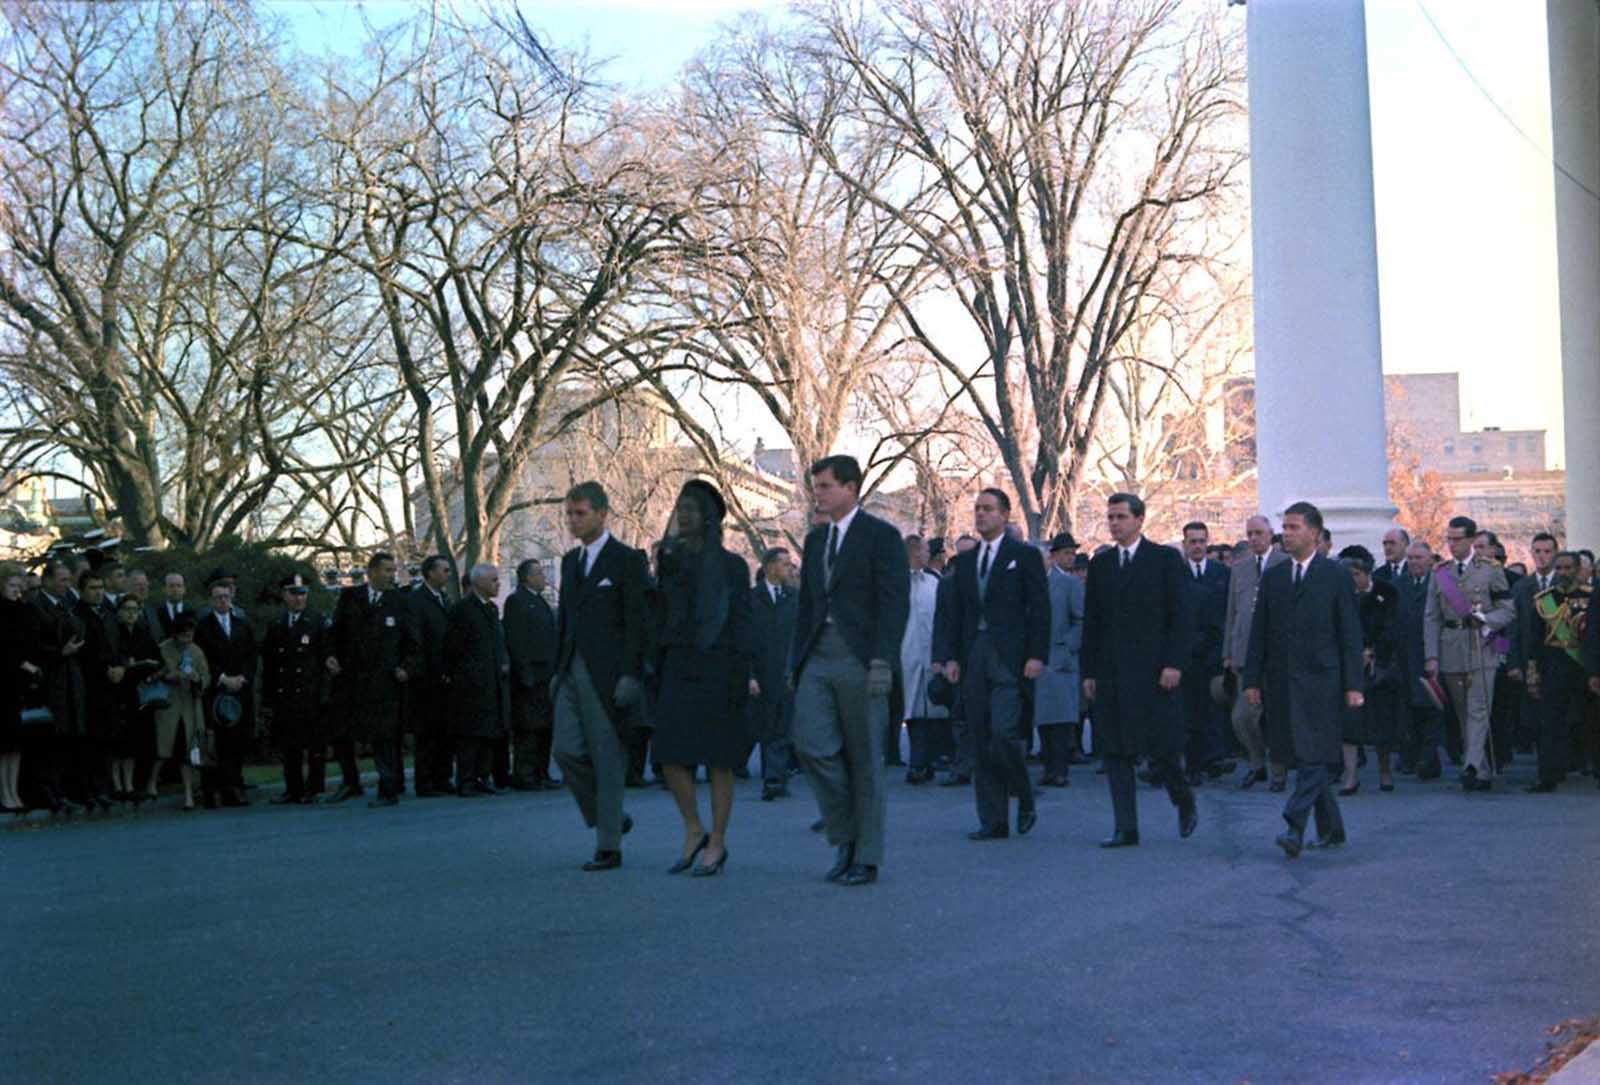 World leaders follow members of the Kennedy family in the funeral procession for the murdered president.